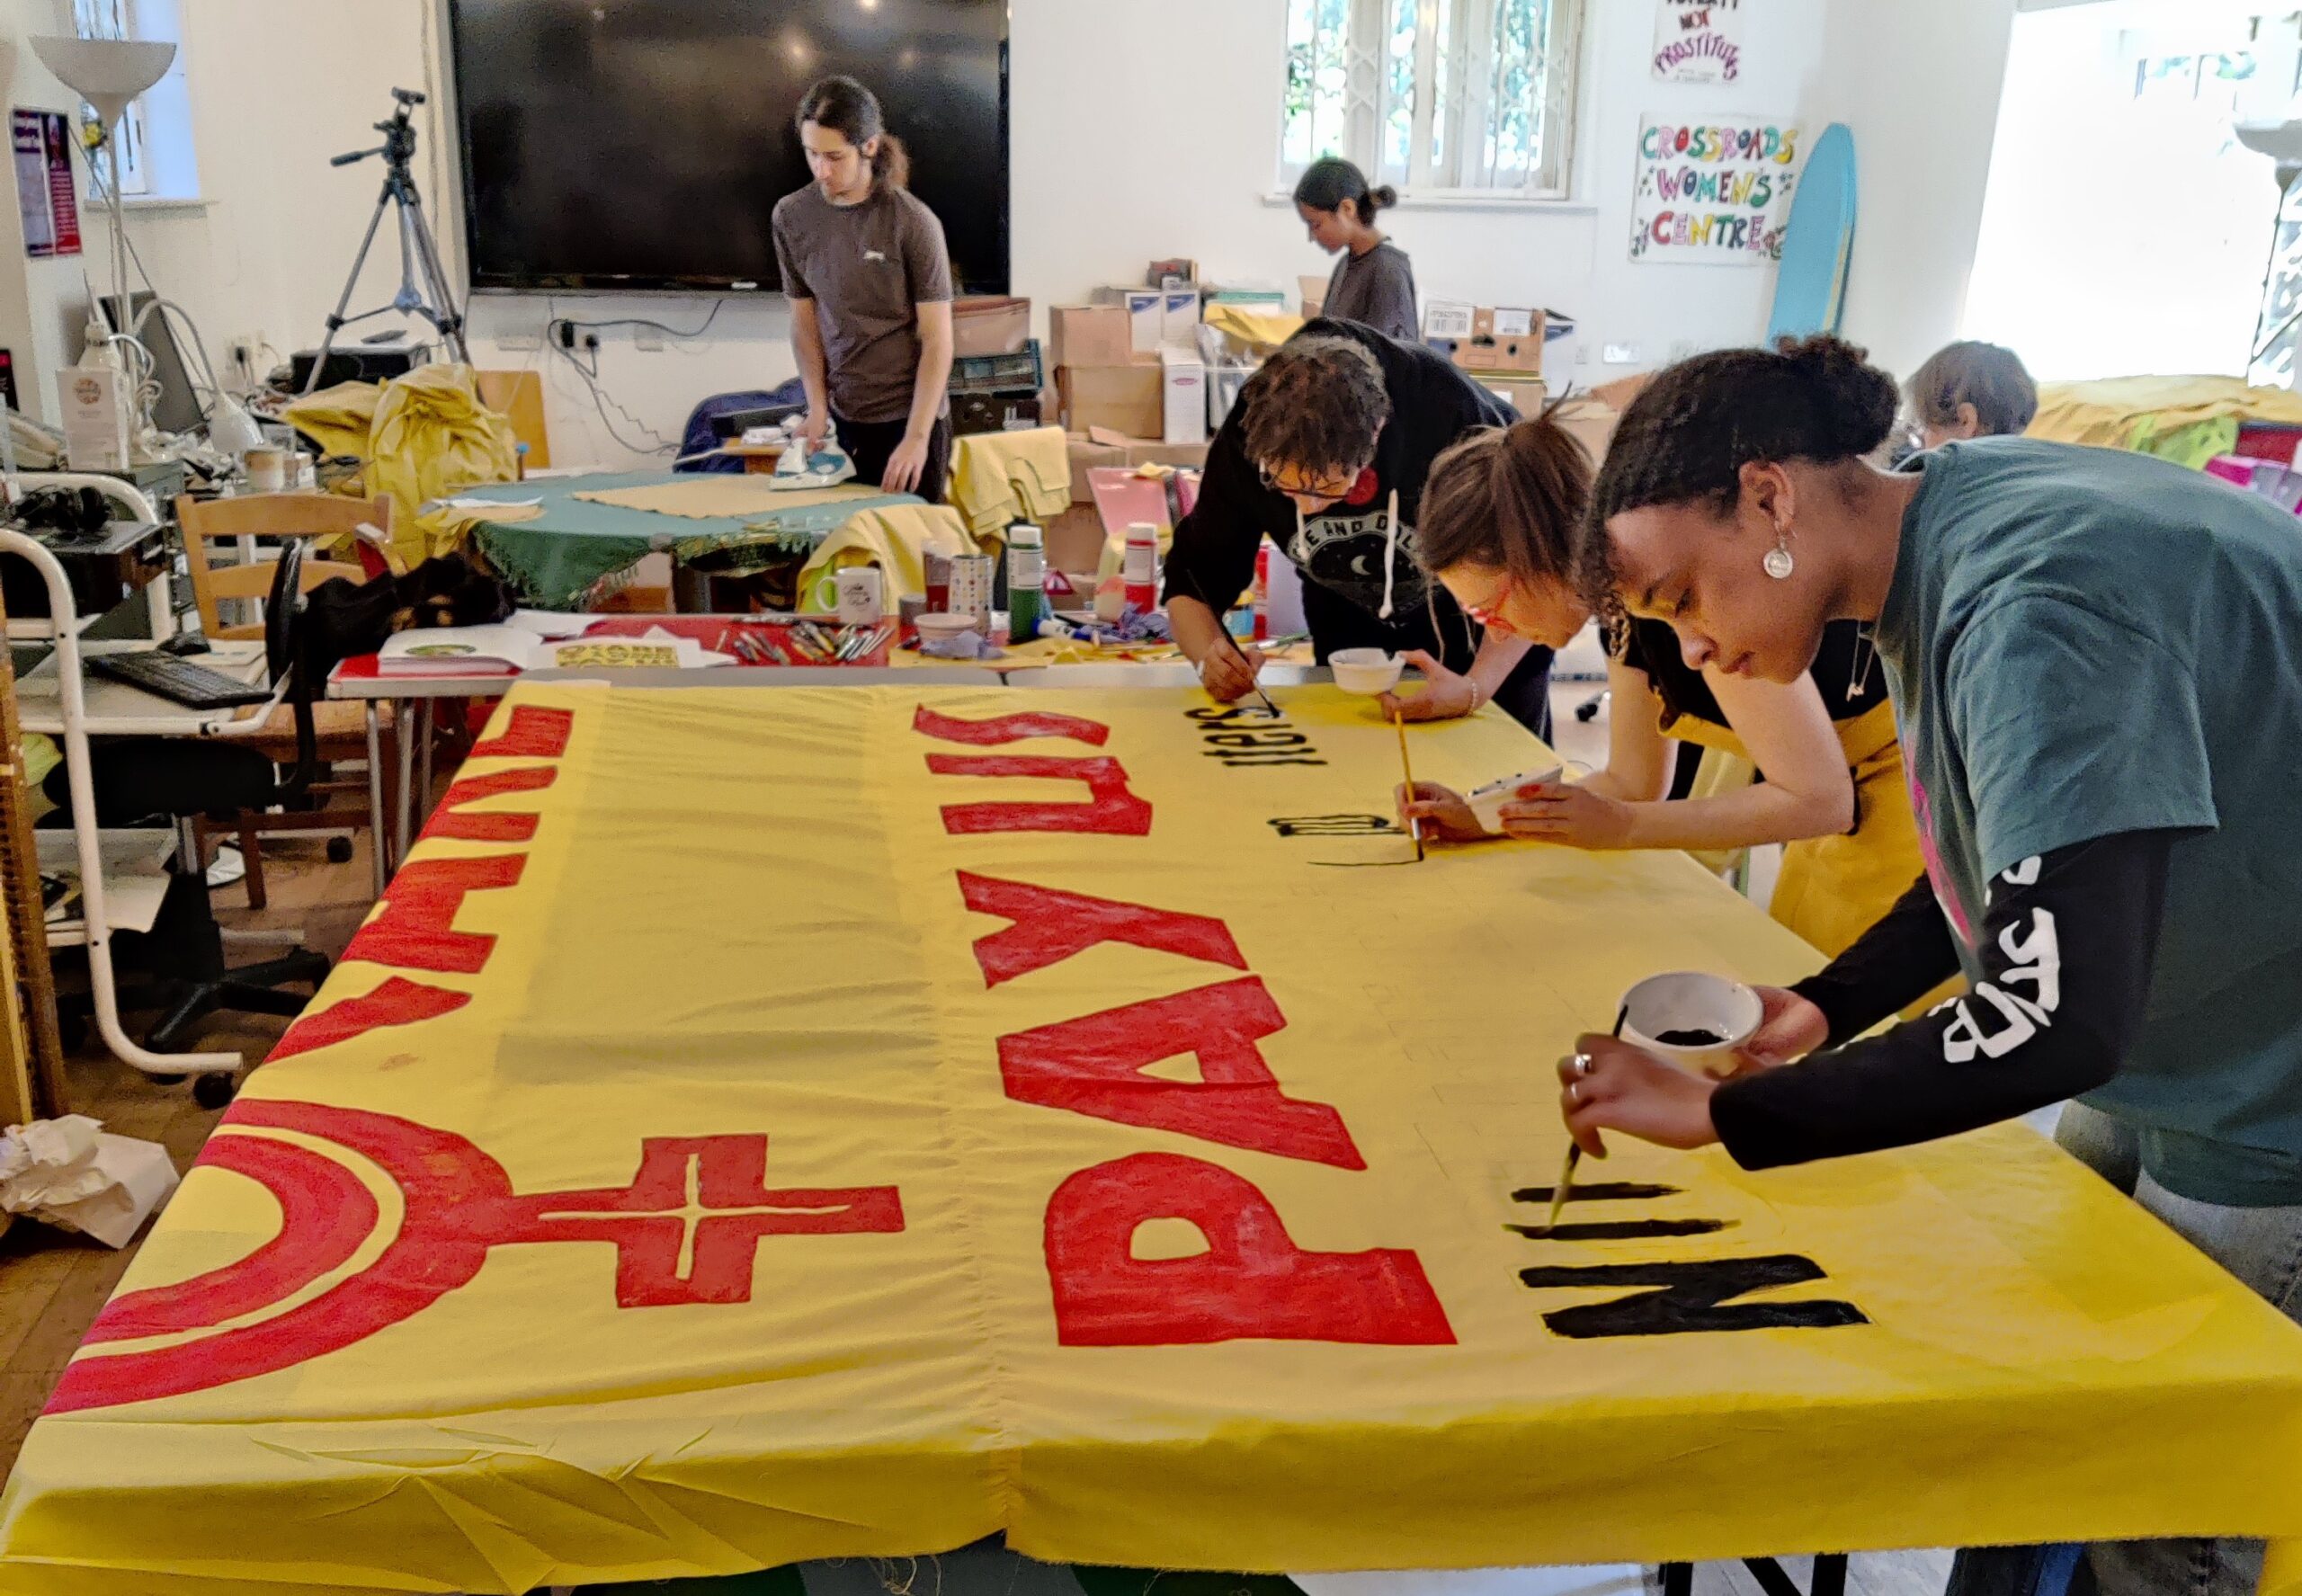 Bannermaking